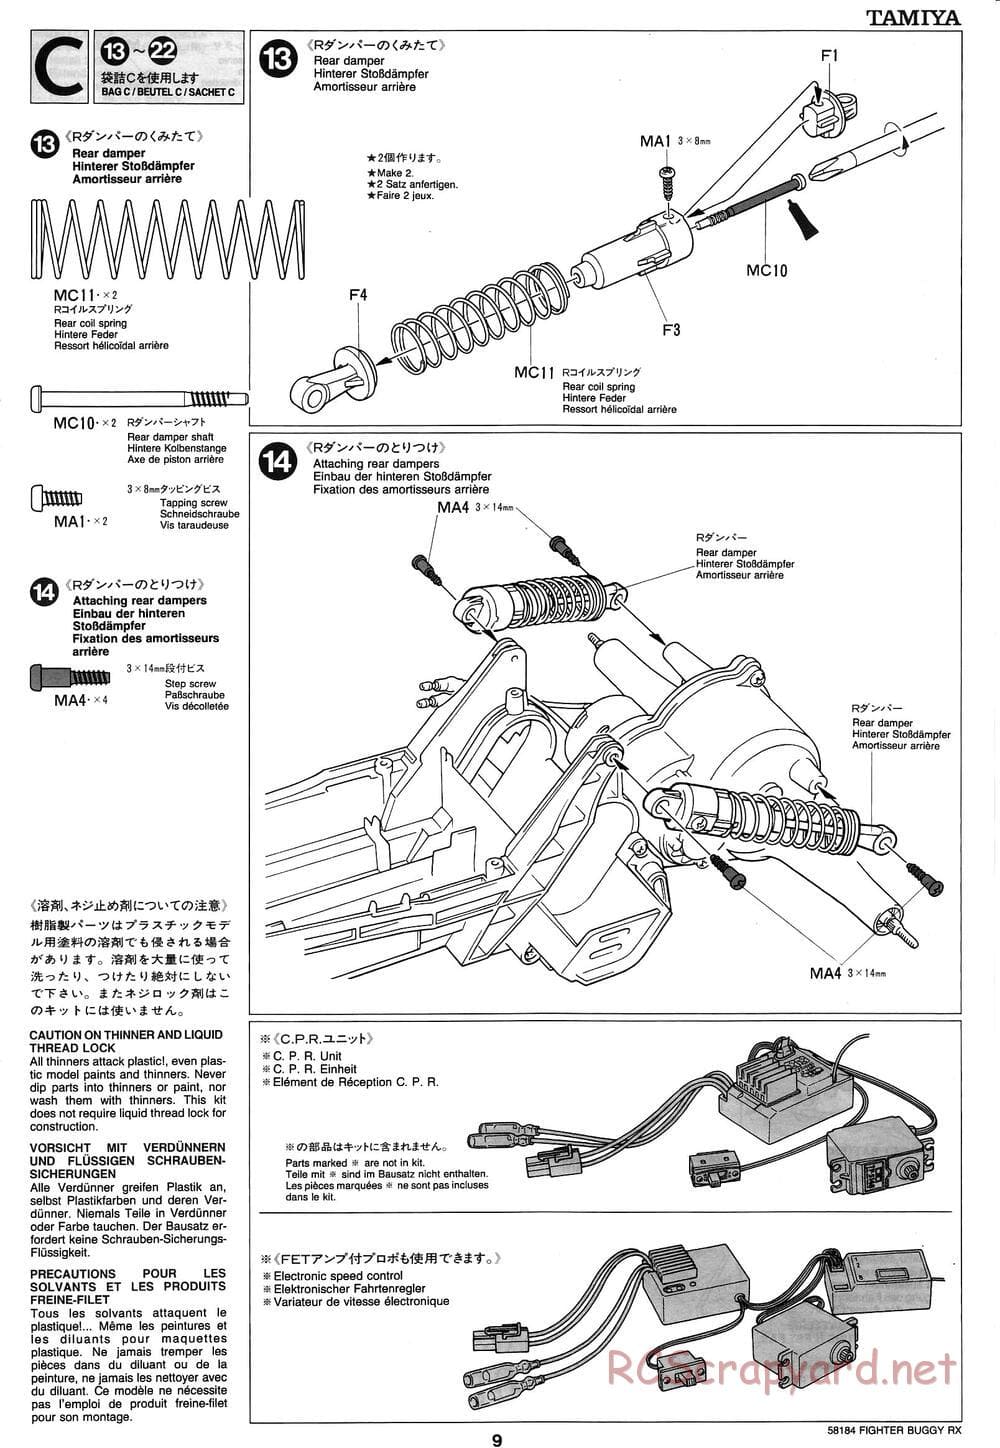 Tamiya - Fighter Buggy RX Chassis - Manual - Page 9